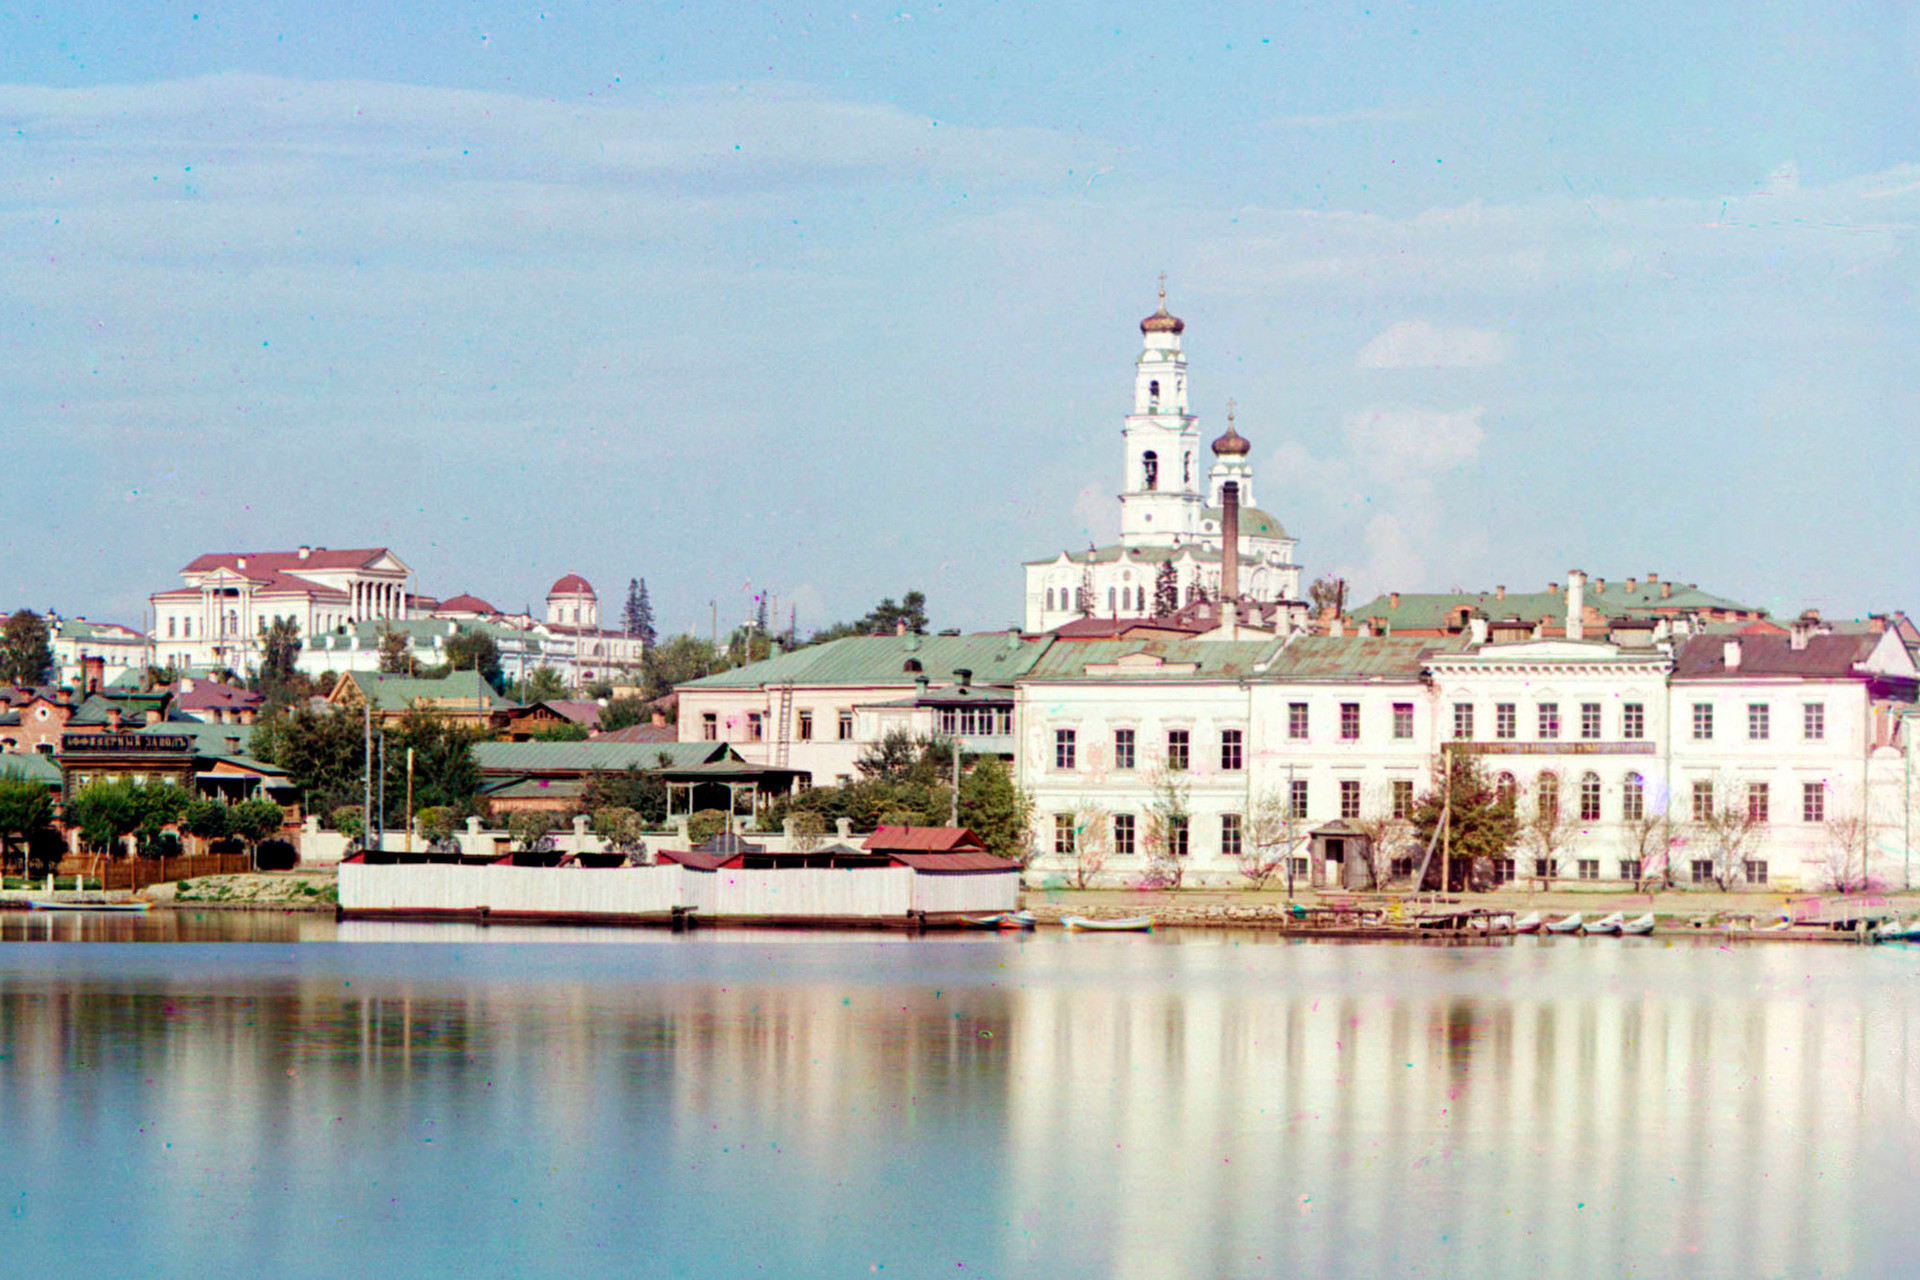 Yekaterinburg. View across City Pond toward Ascension Hill. From left:  Rastorguev-Kharitonov Mansion, Ipatyev house (partially visible beneath main portico of Kharitonov Mansion), bell tower & Church of Ascension. Summer 1909.